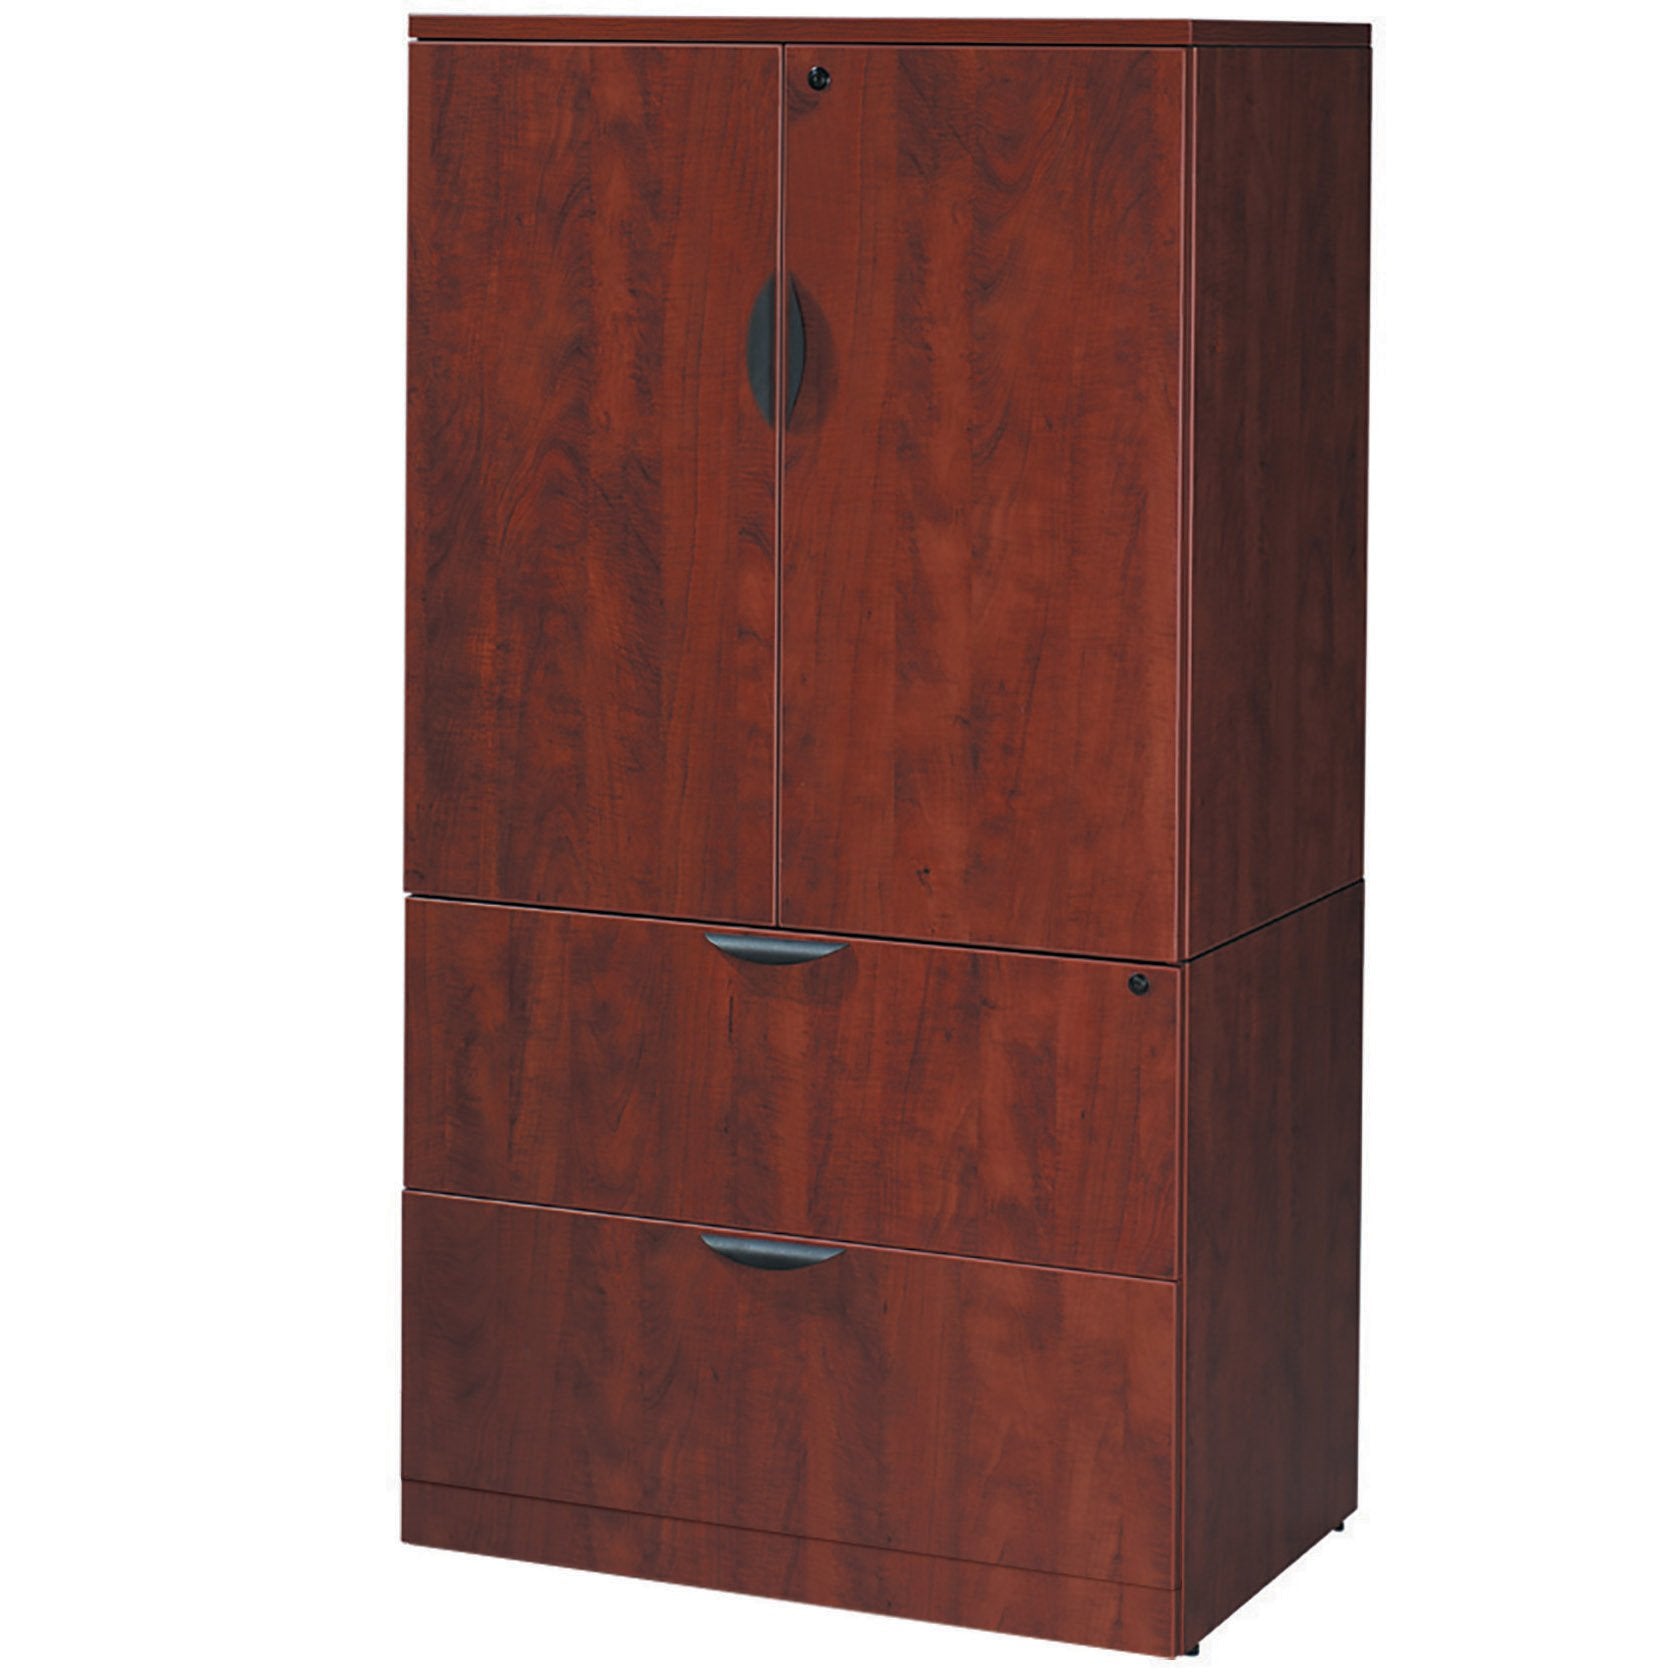 Storage File Cabinet with Drawers